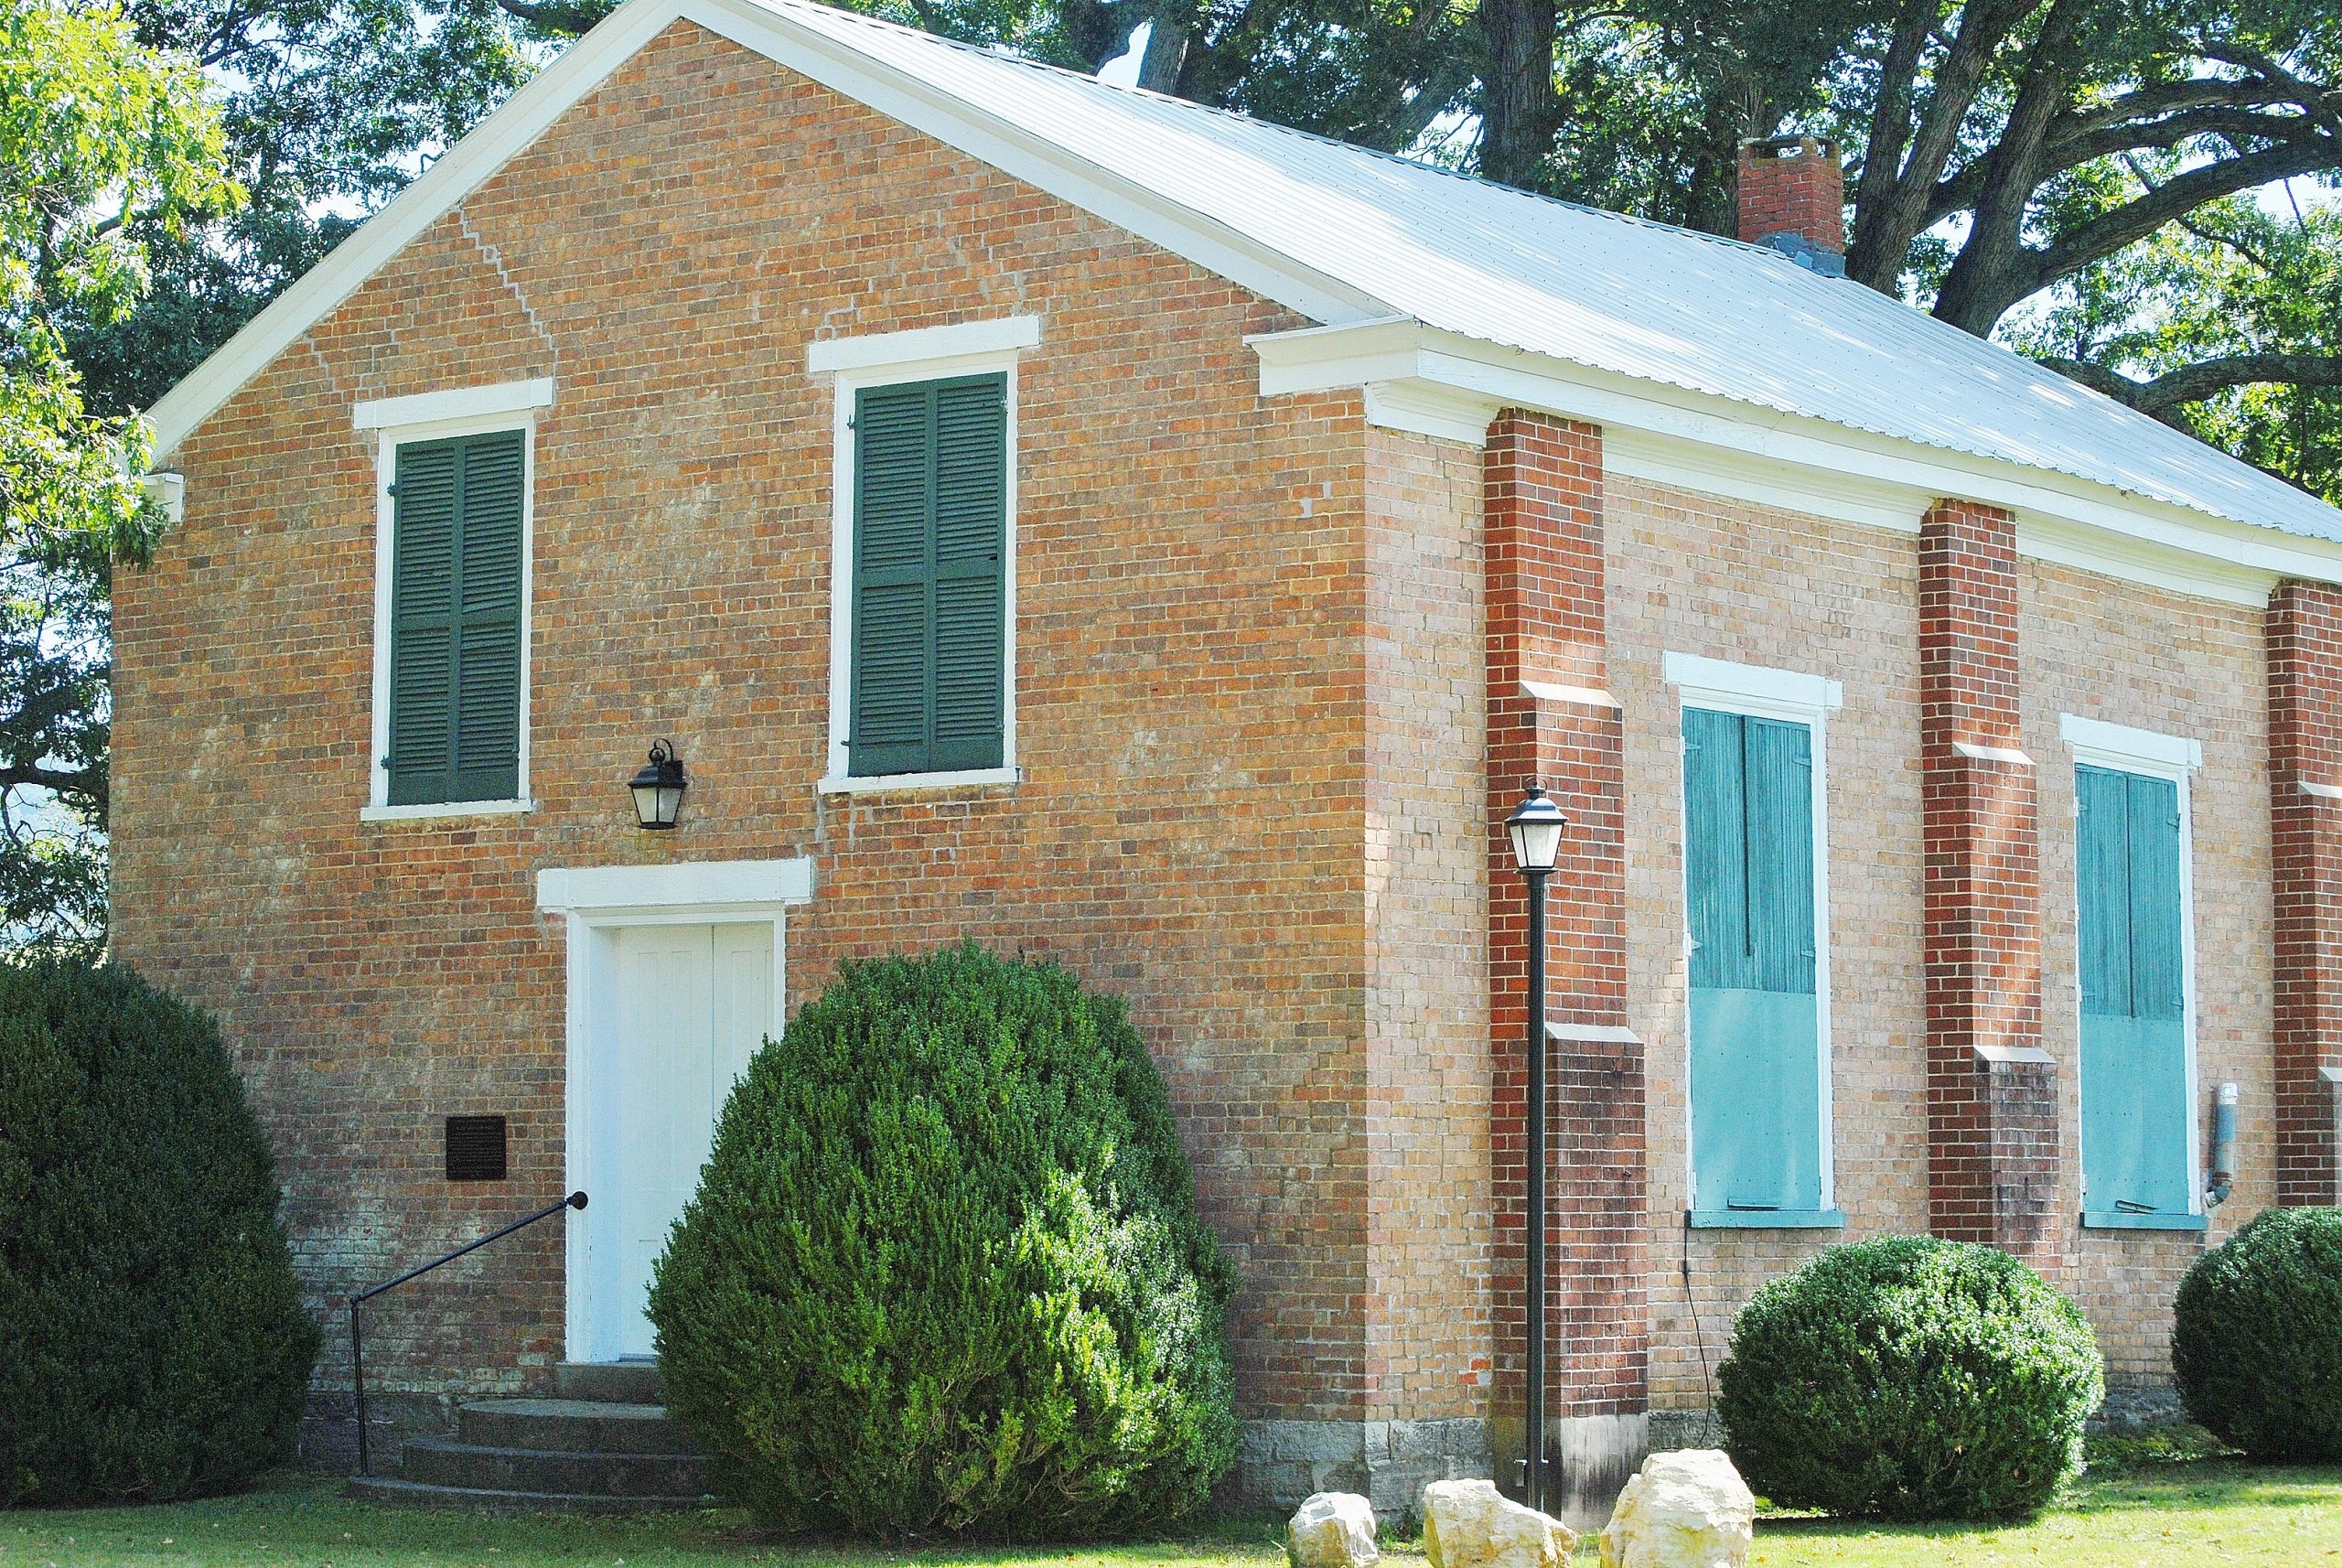 098-0027_Crocketts_Cove_Presbyterian_Church_2016_Ext_Front_Oblique_VLR_Online-scaled